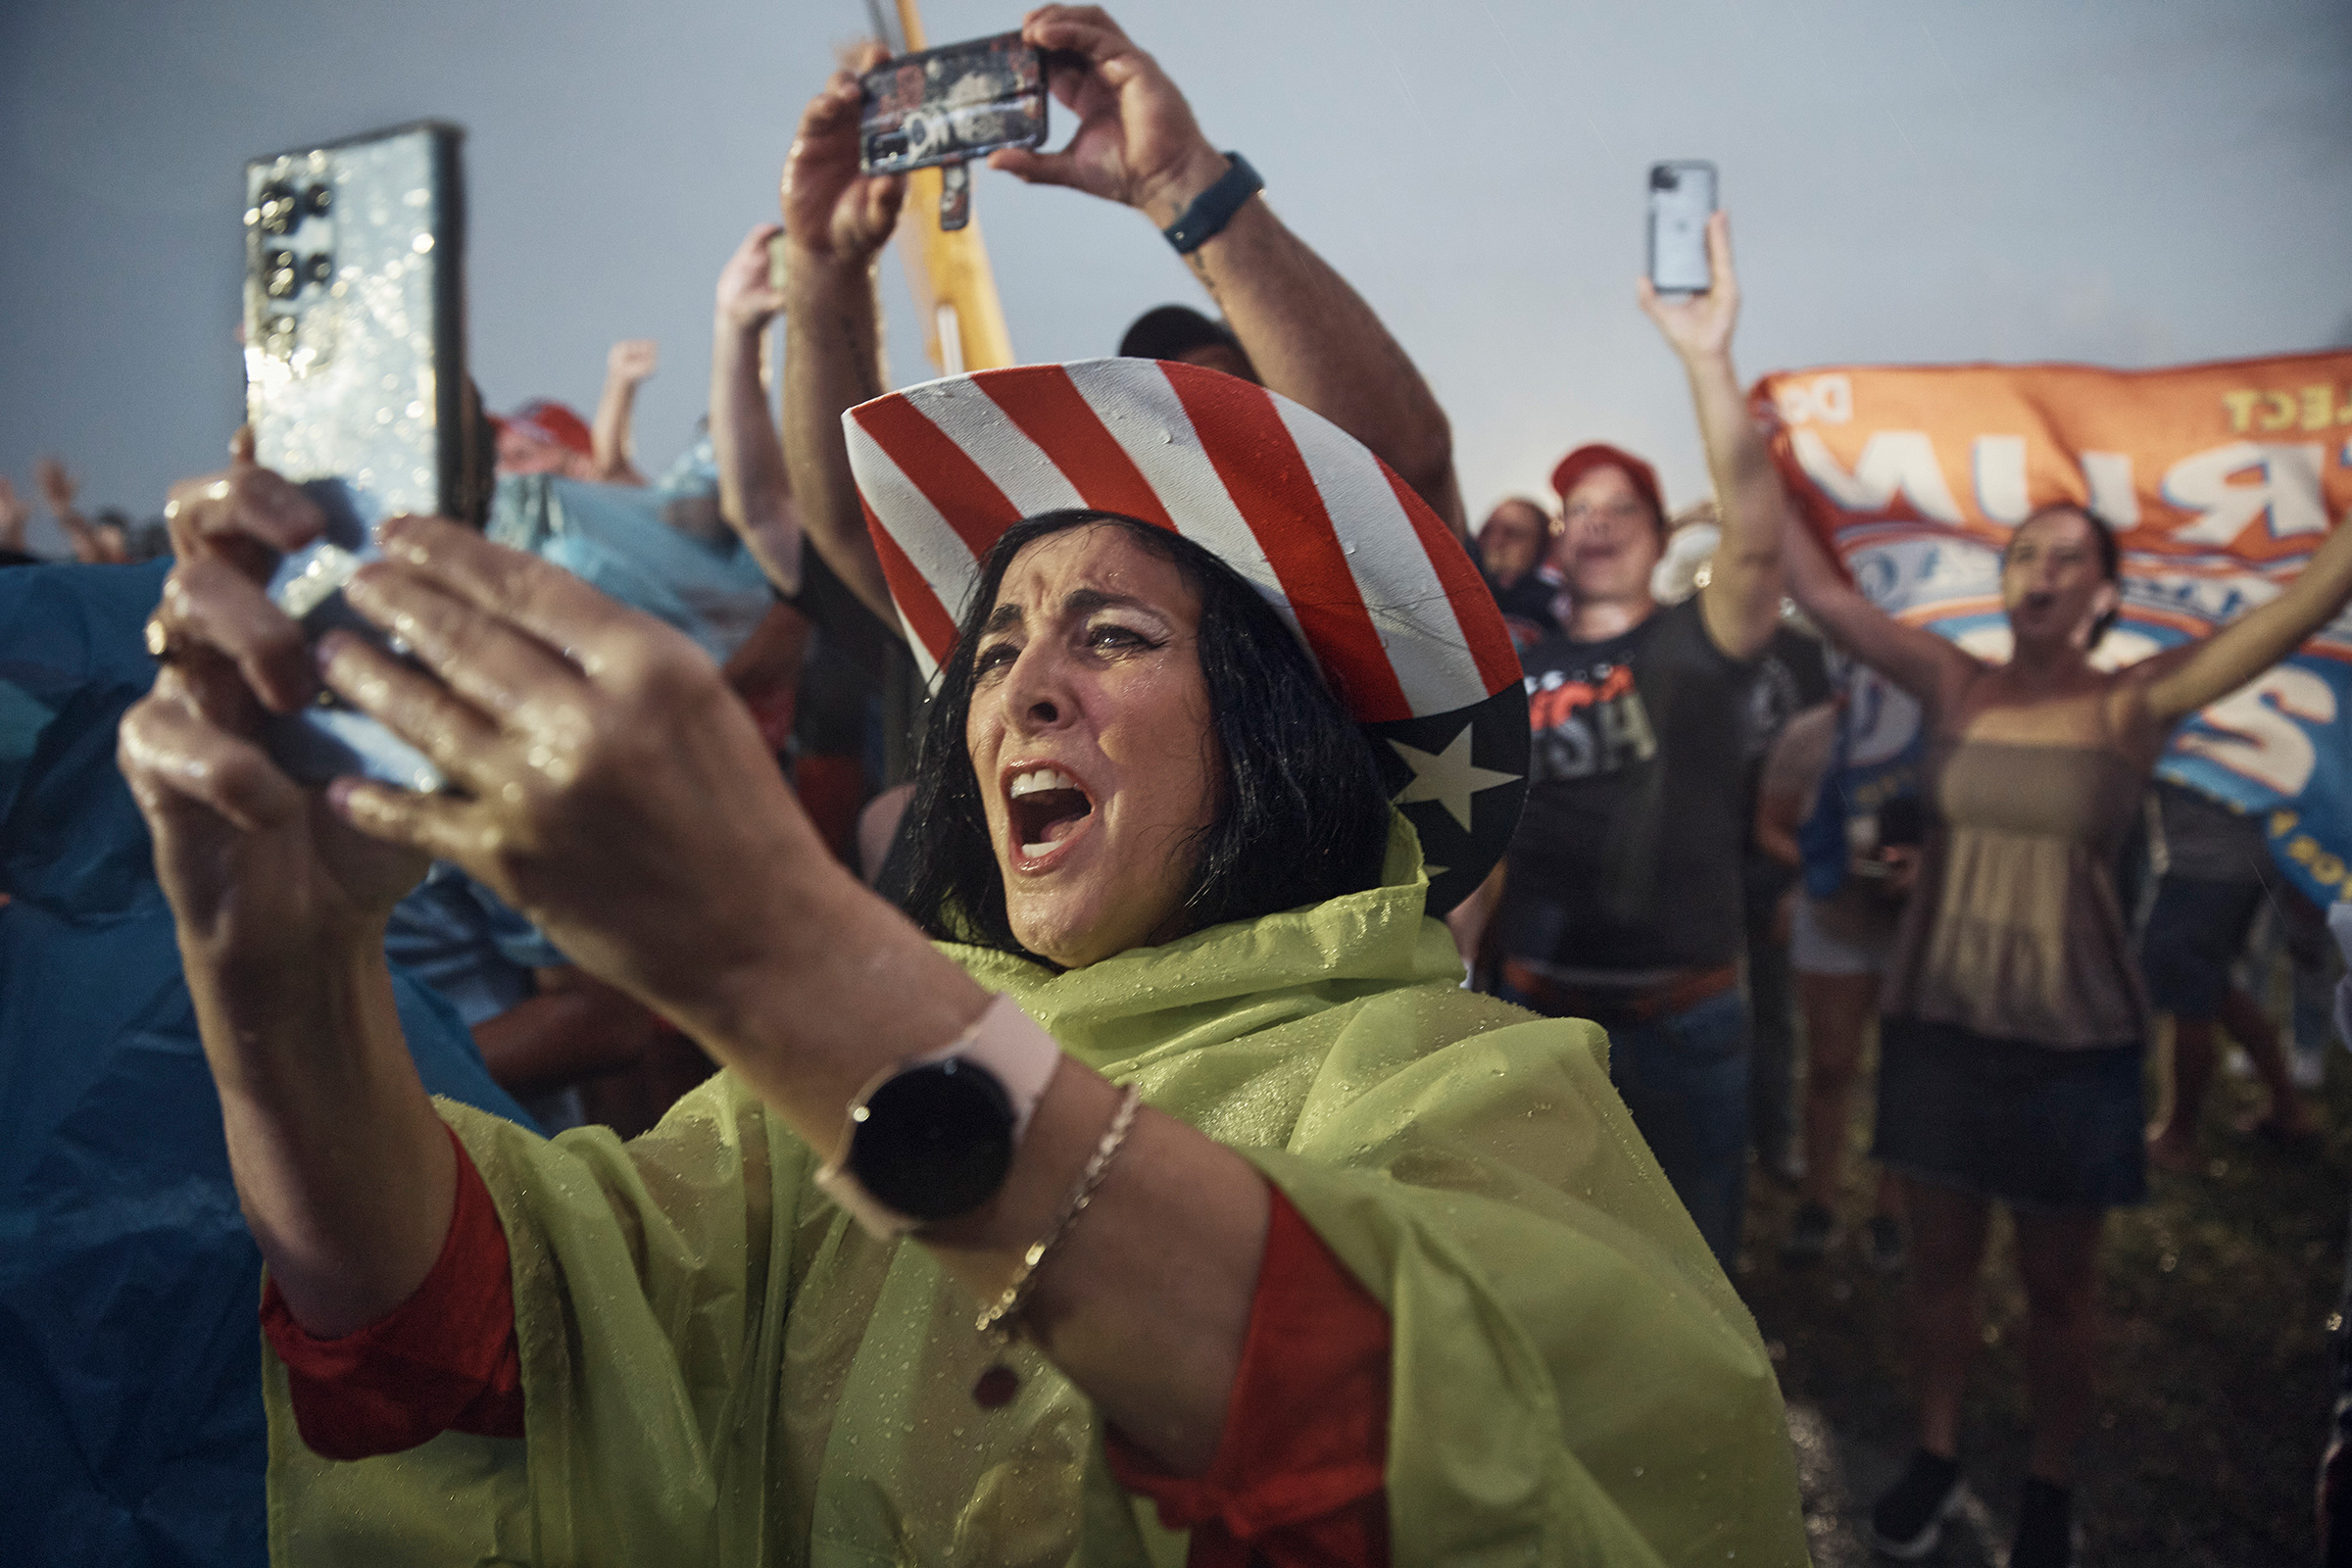 Supporters cheer as it rains on a <a href="https://time.com/6232075/republicans-blame-game-trump-elections/">Donald Trump rally</a> in Miami on Nov. 6. (Andres Kudacki for TIME)